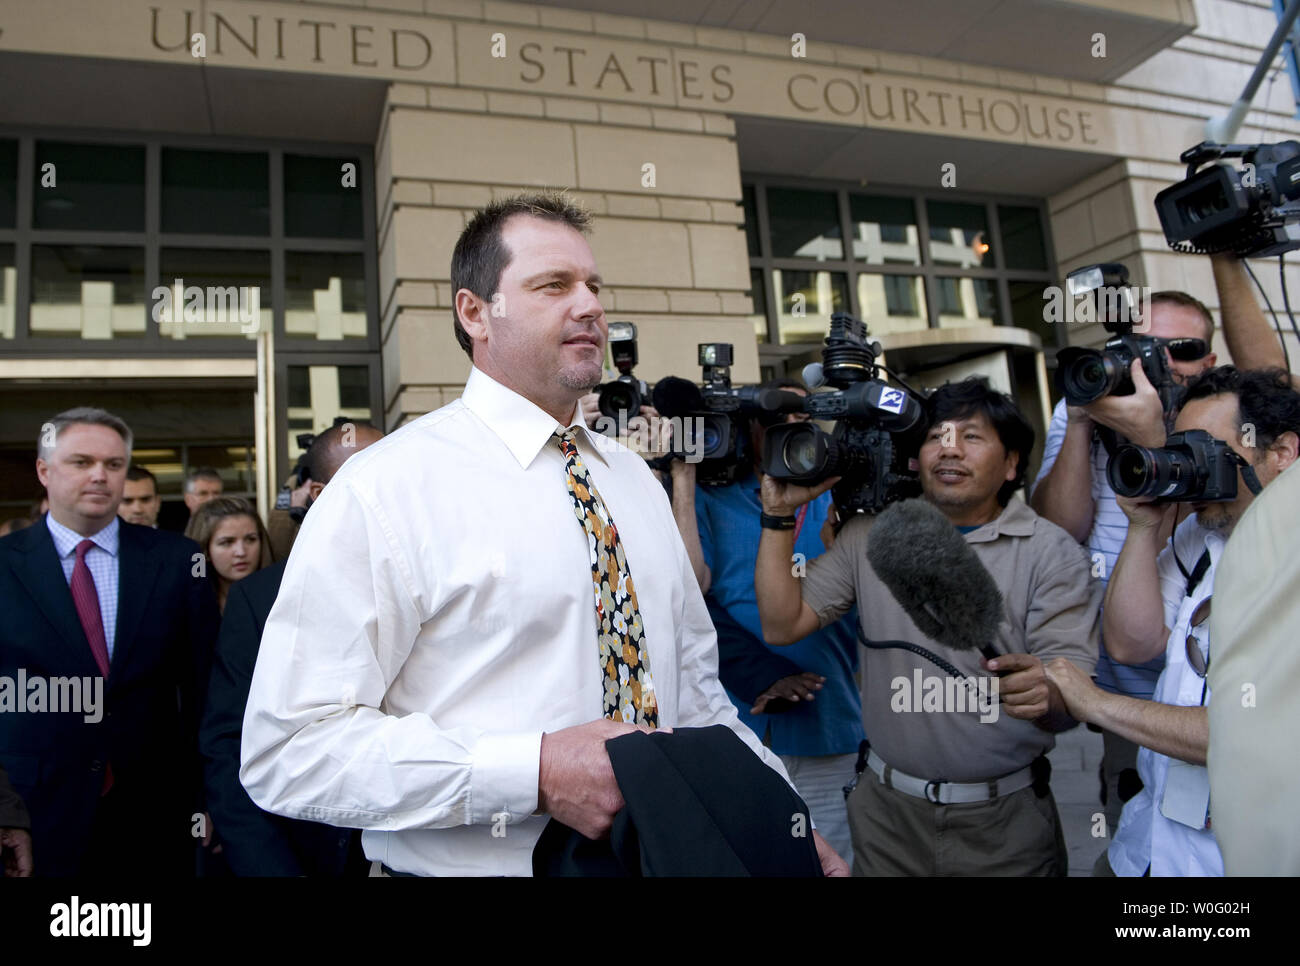 Former Major League Baseball pitcher Roger Clemens leaves the U.S. District Court House after his arraignment hearing in Washington on August 30, 2010. Clemens is being charged with making false statements, perjury and obstructing Congress in his congressional testimony on his alleged use of performance enhancing drugs.   UPI/Kevin Dietsch Stock Photo